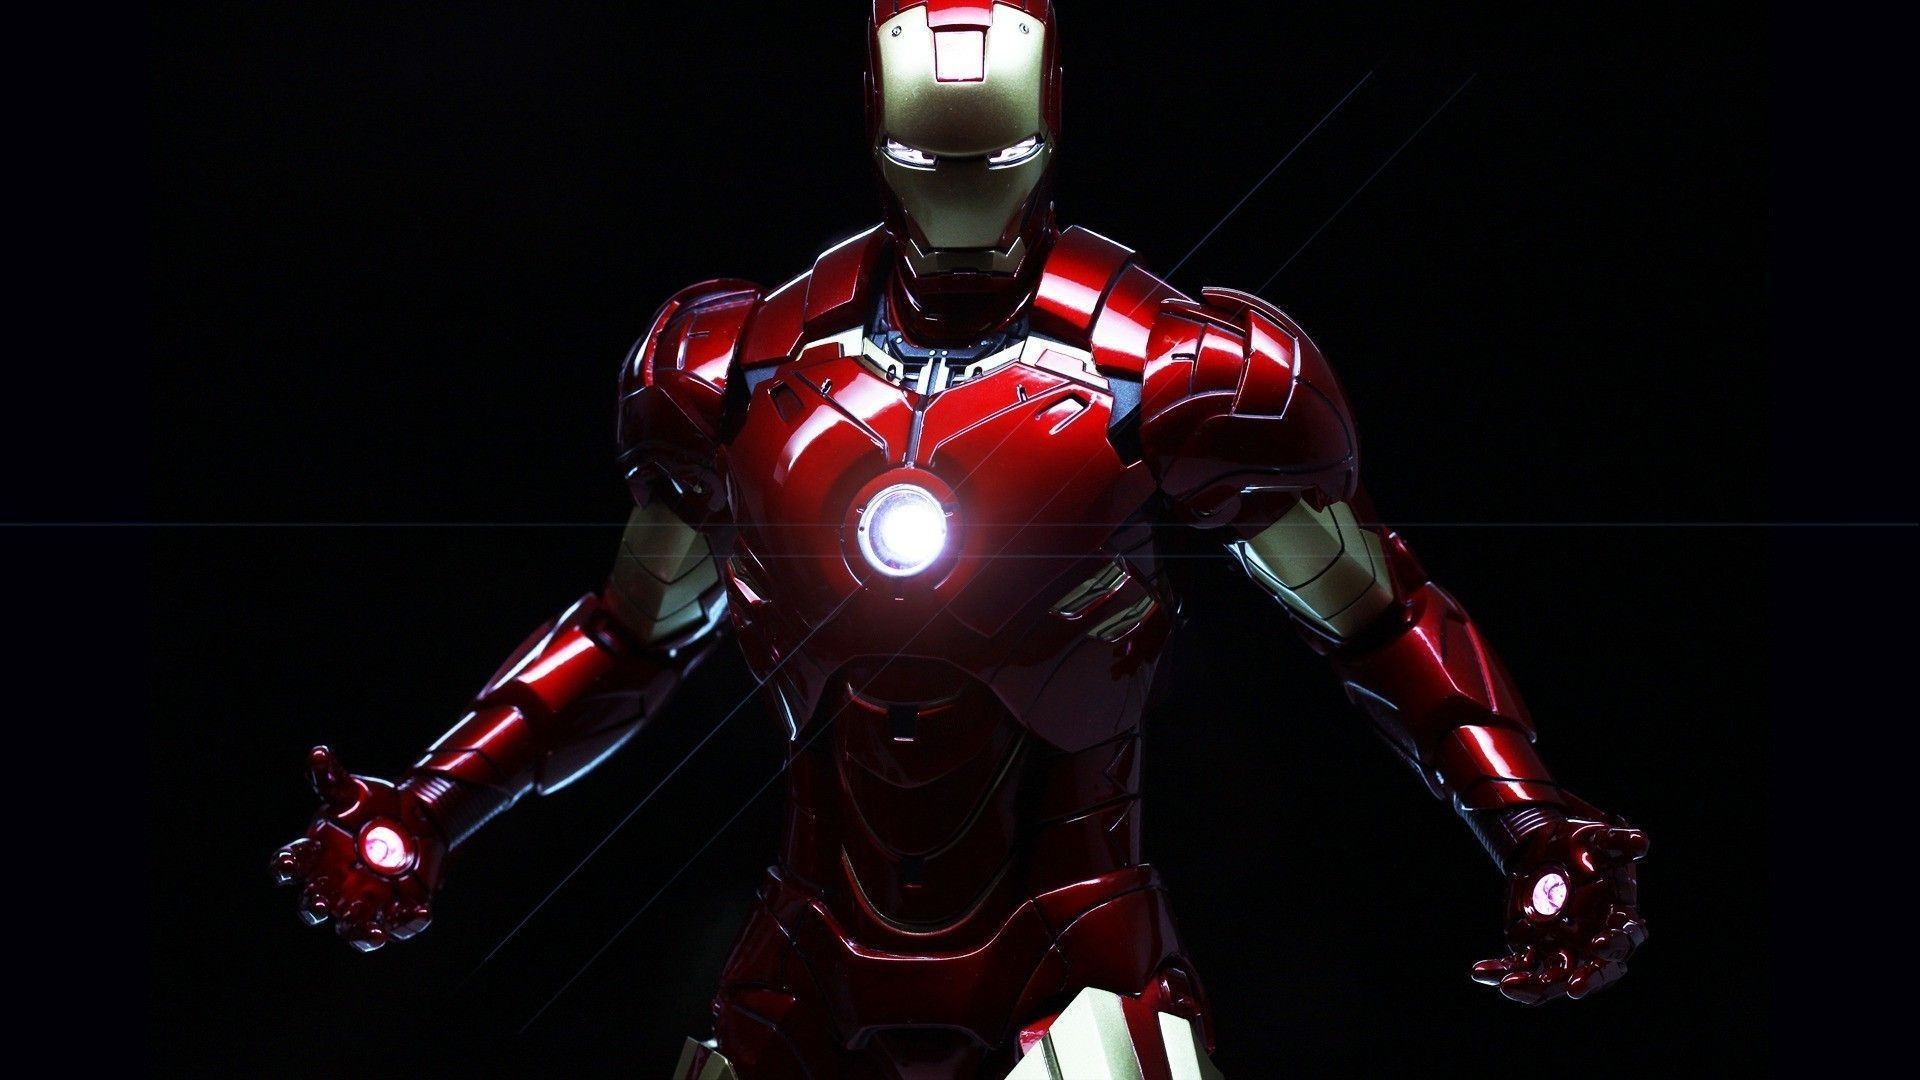 1920x1080 Iron Man Hd Wallpaper Collection For Free Download